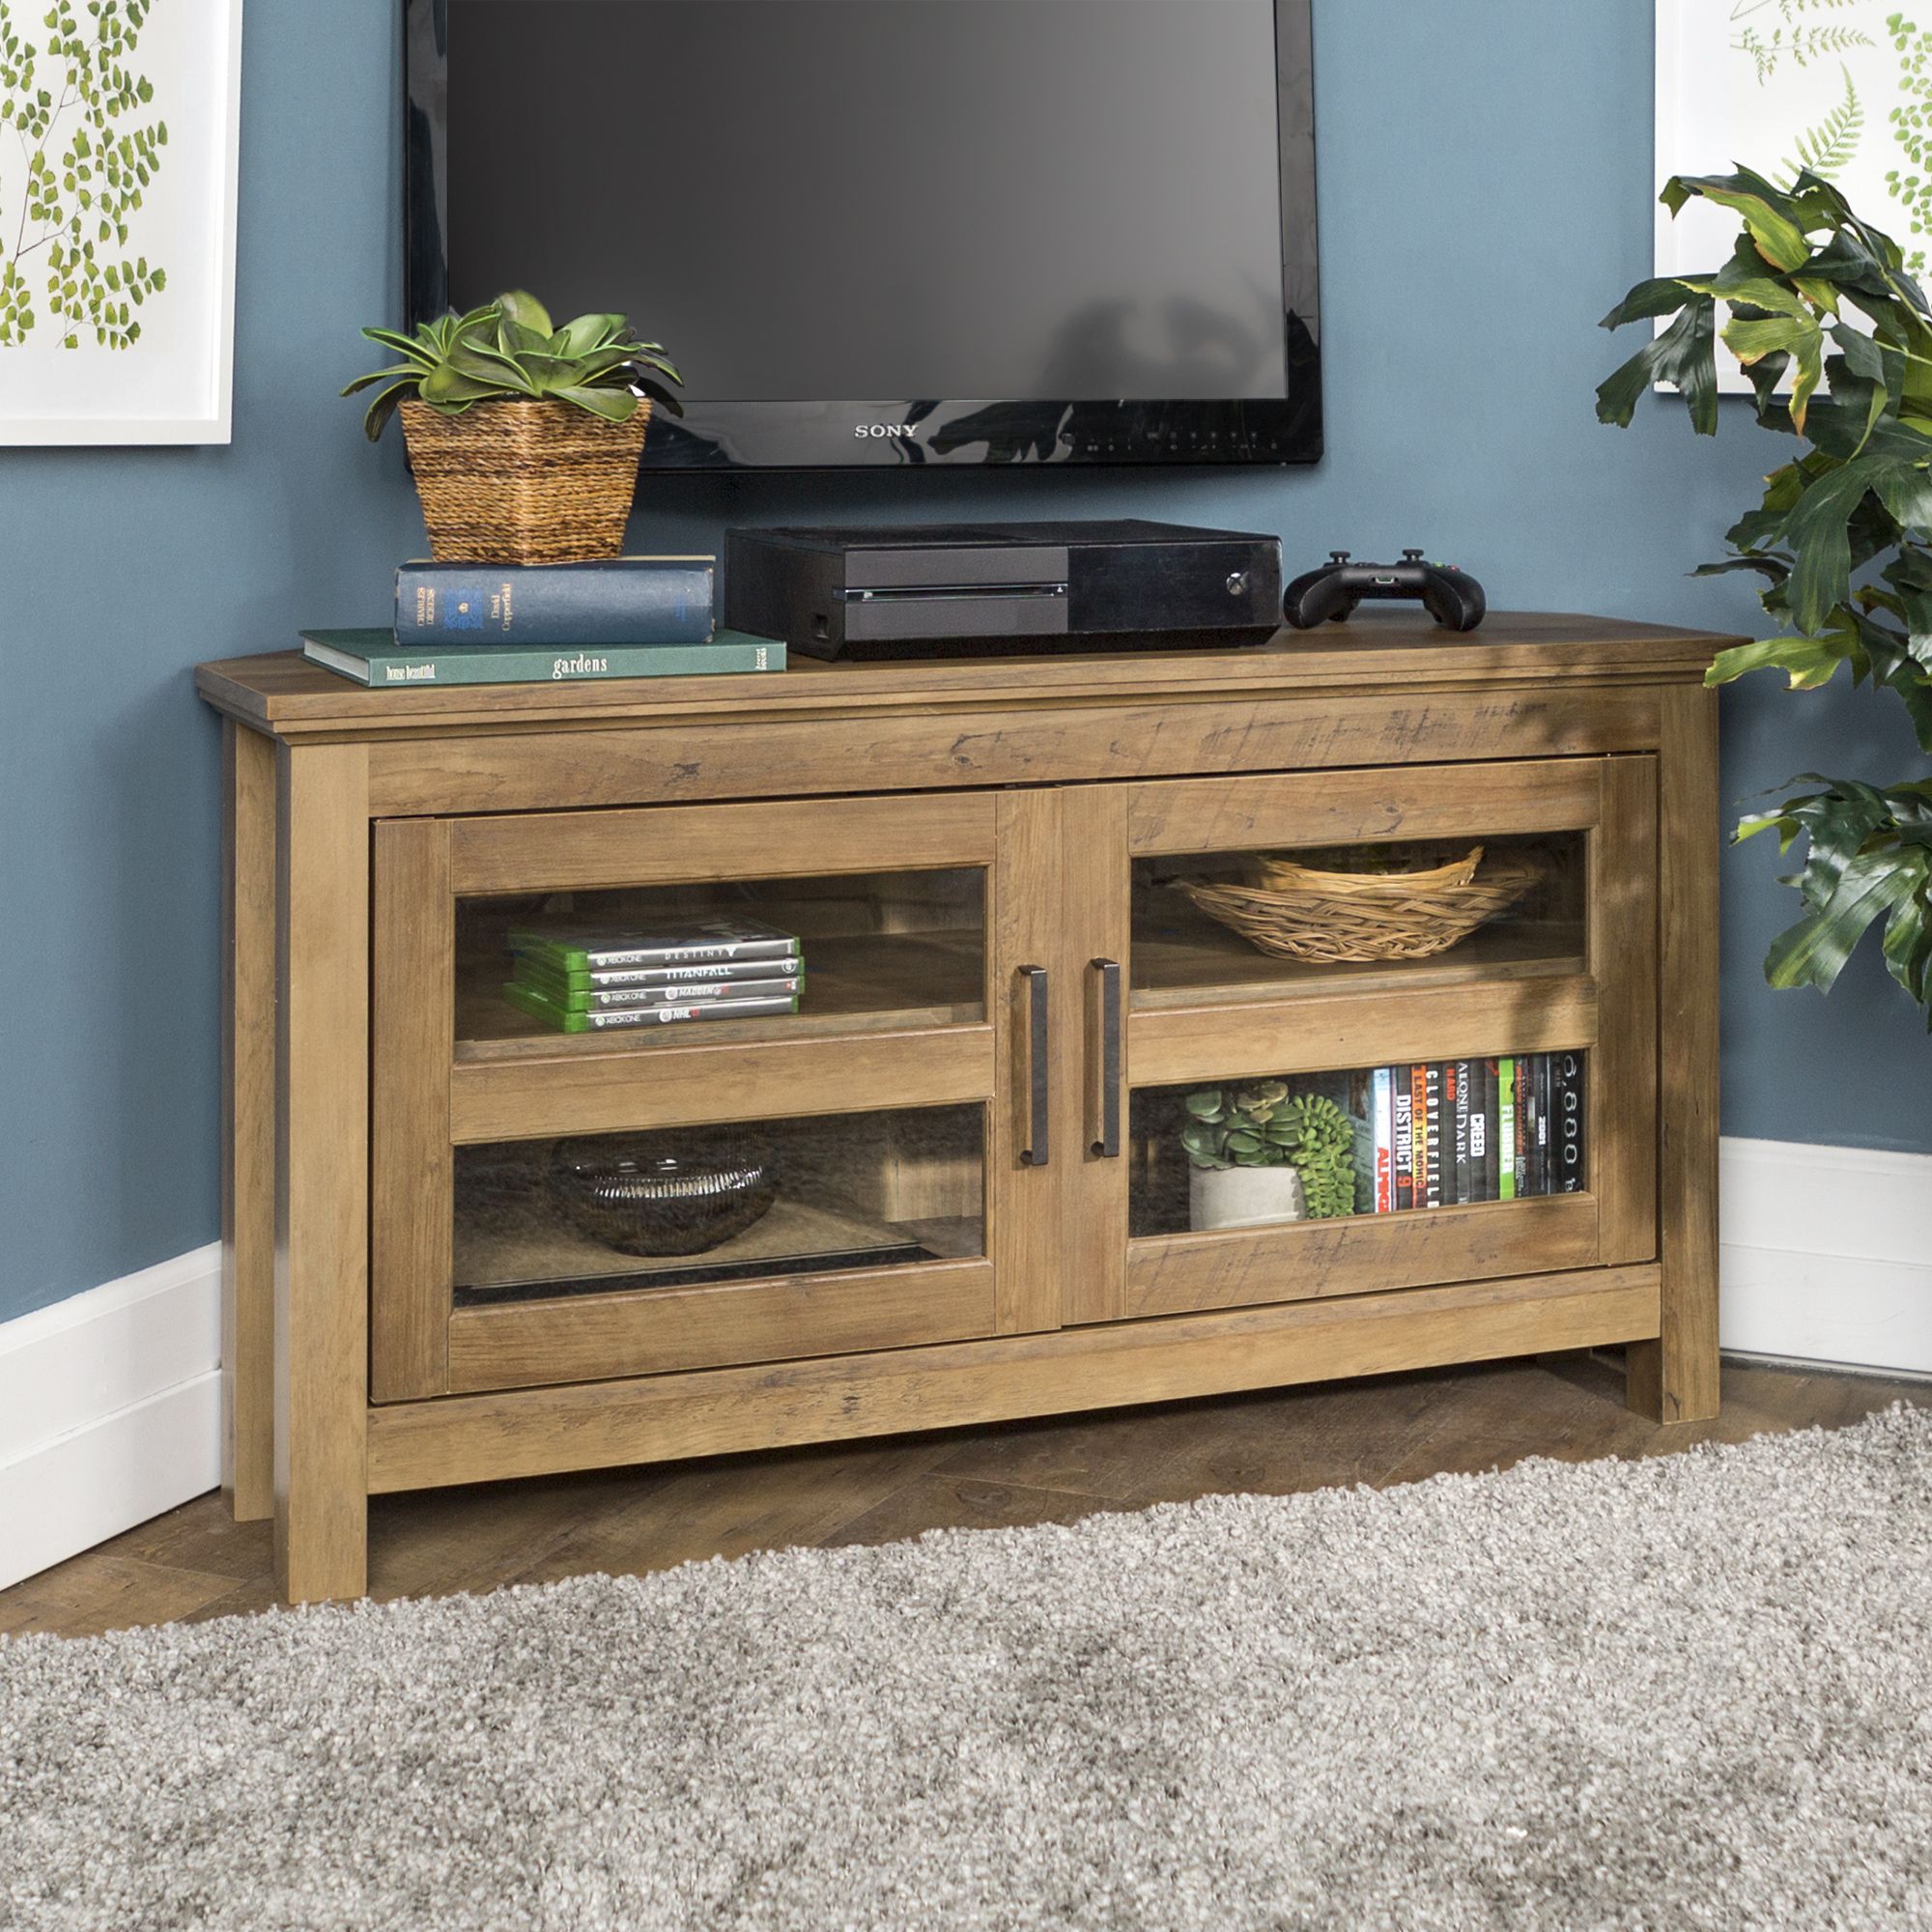 Walker Edison Wood Corner Tv Stand For Tvs Up To 48 Pertaining To Wooden Corner Tv Stands (View 3 of 15)